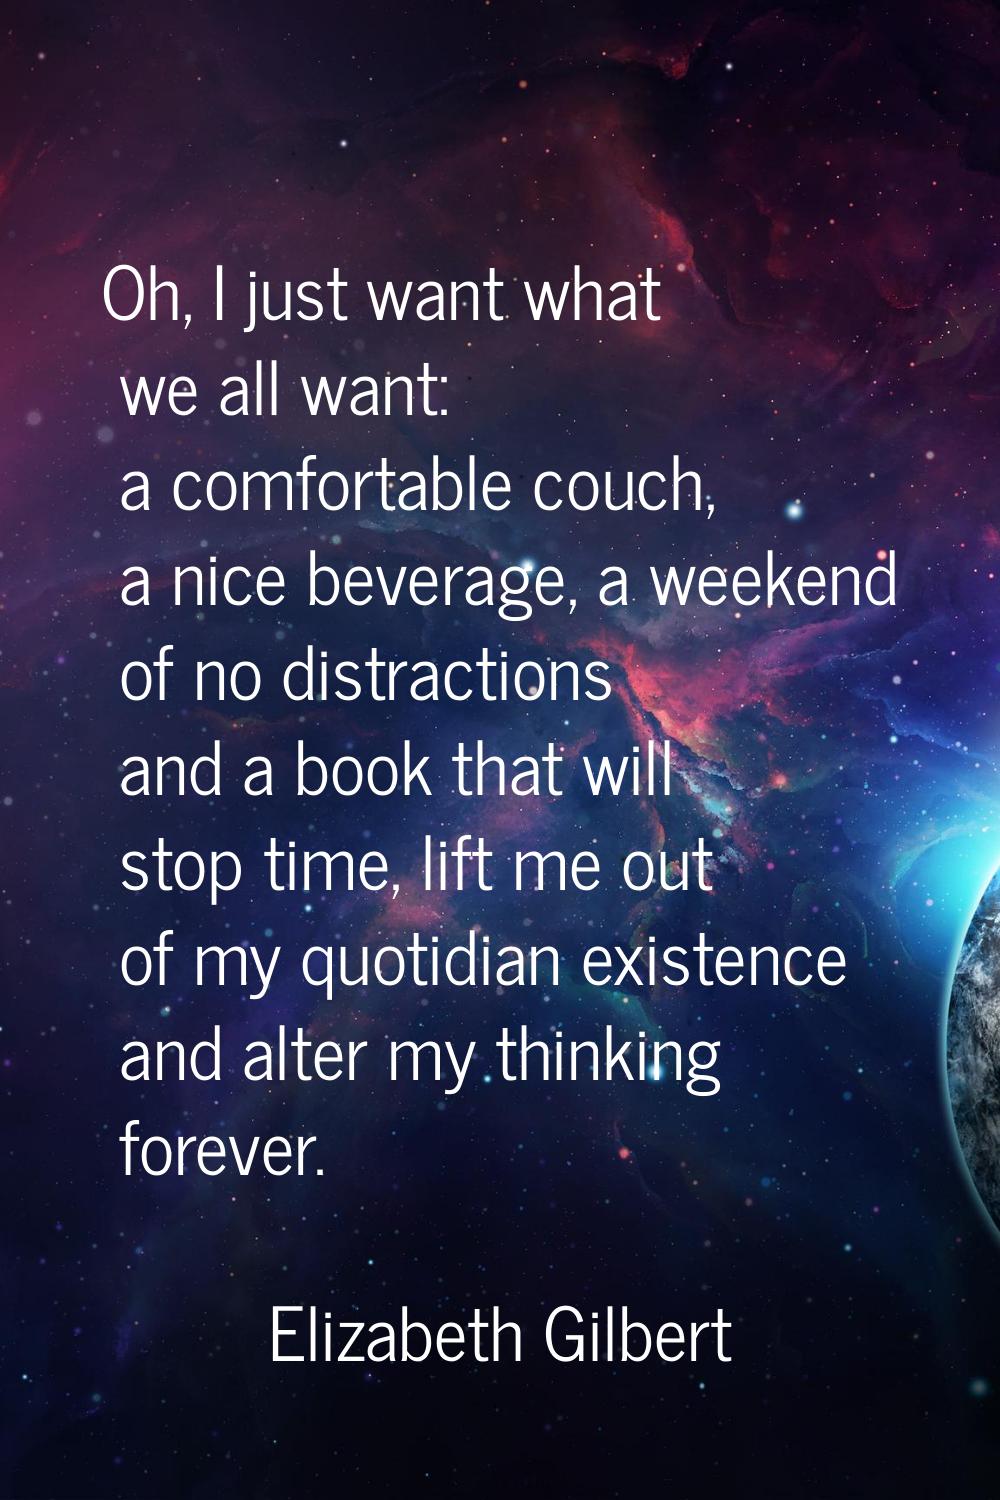 Oh, I just want what we all want: a comfortable couch, a nice beverage, a weekend of no distraction